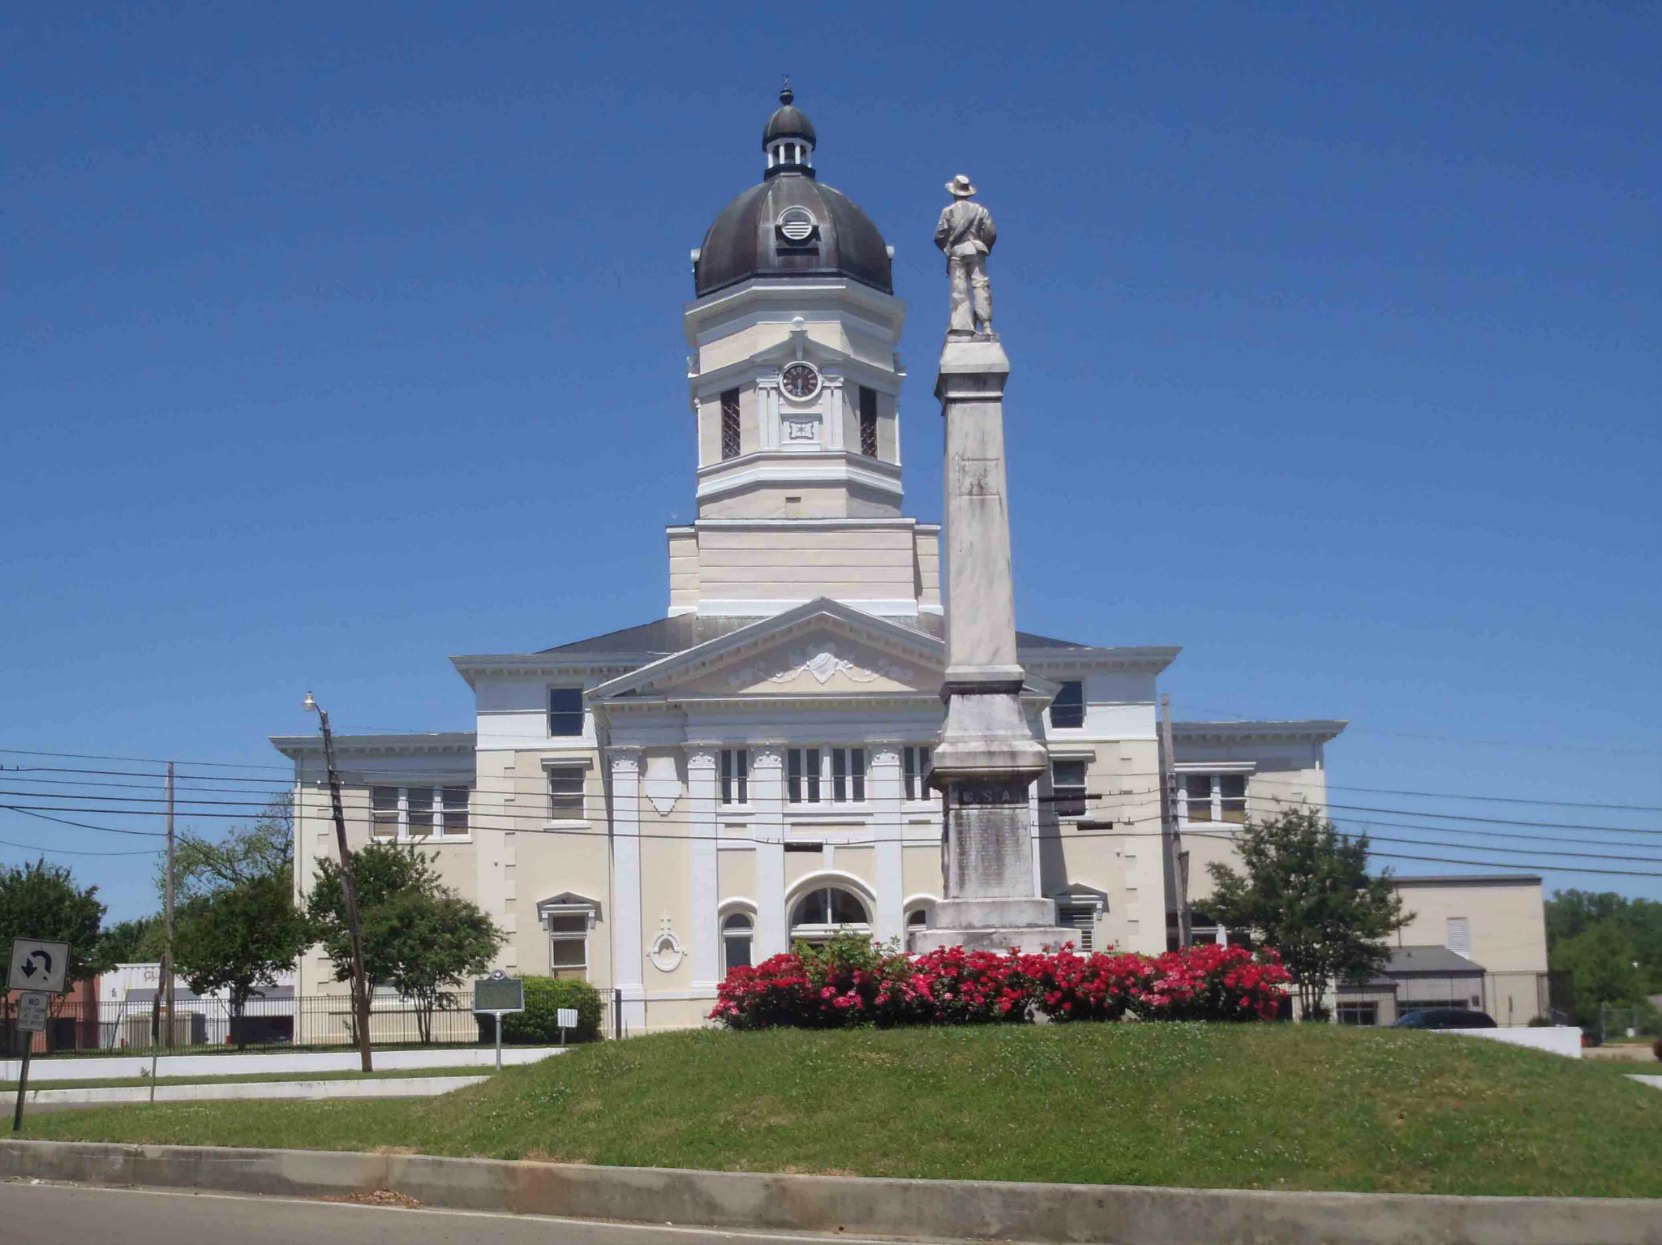 Claiborne County Courthouse and Civil War Memorial, Port Gibson, Mississippi